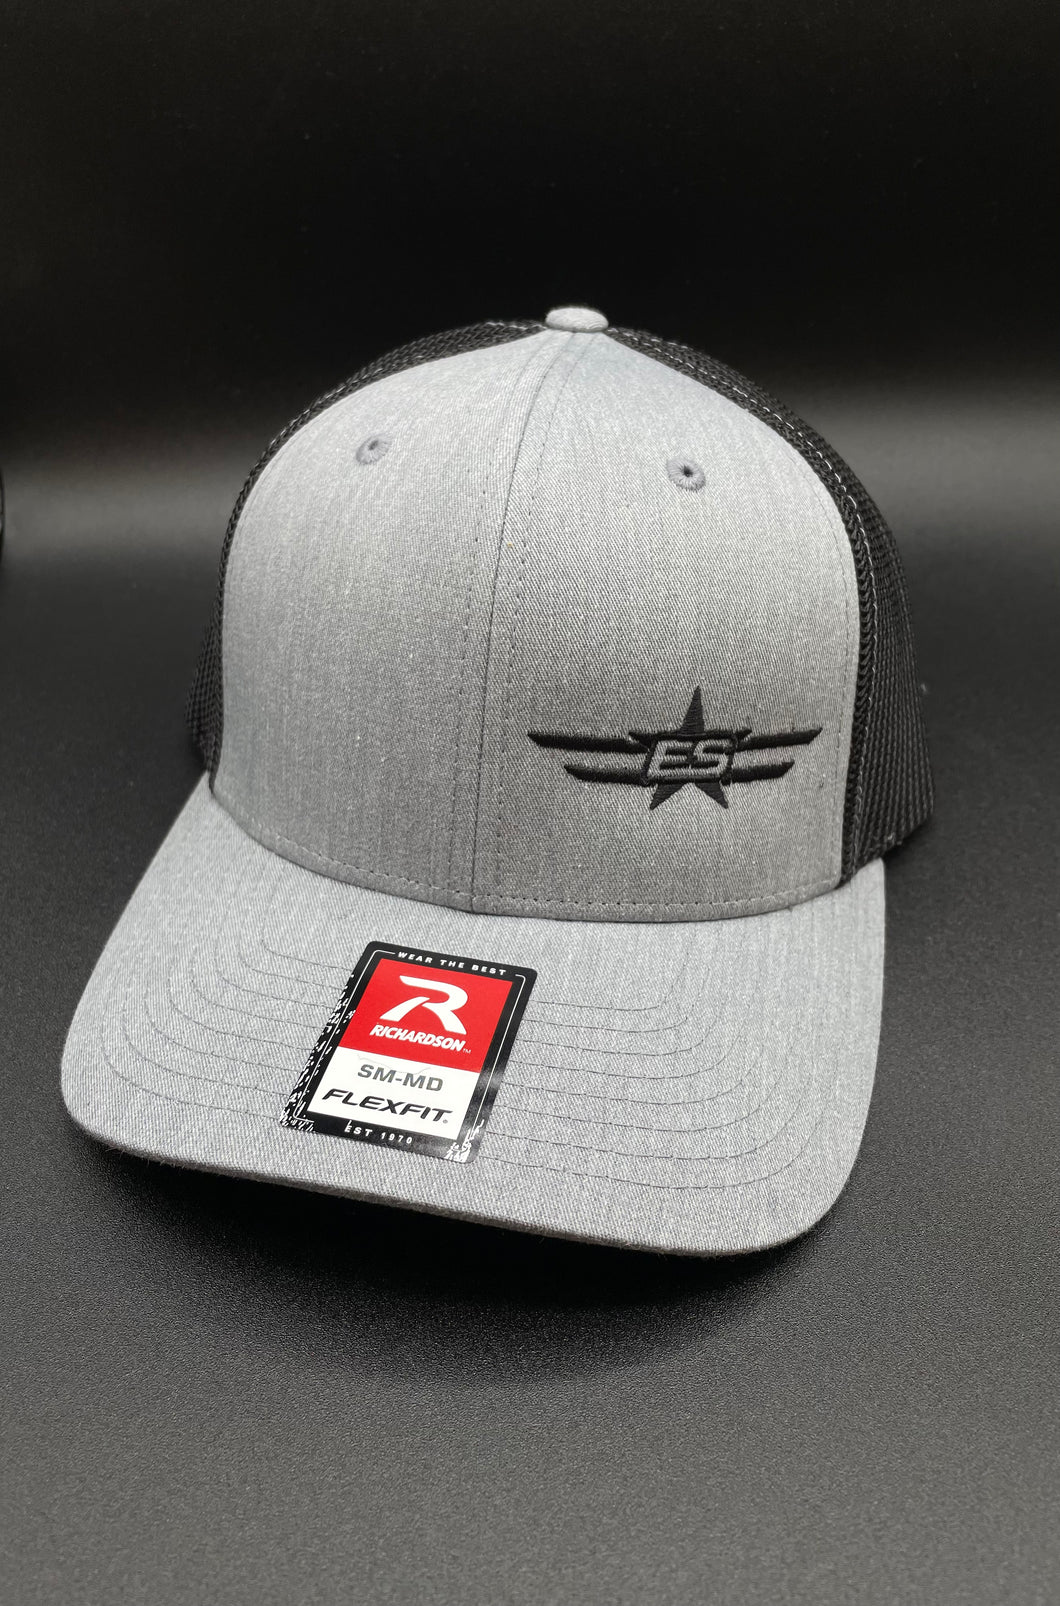 Heather Gray and Black Fitted R-Flex Cap